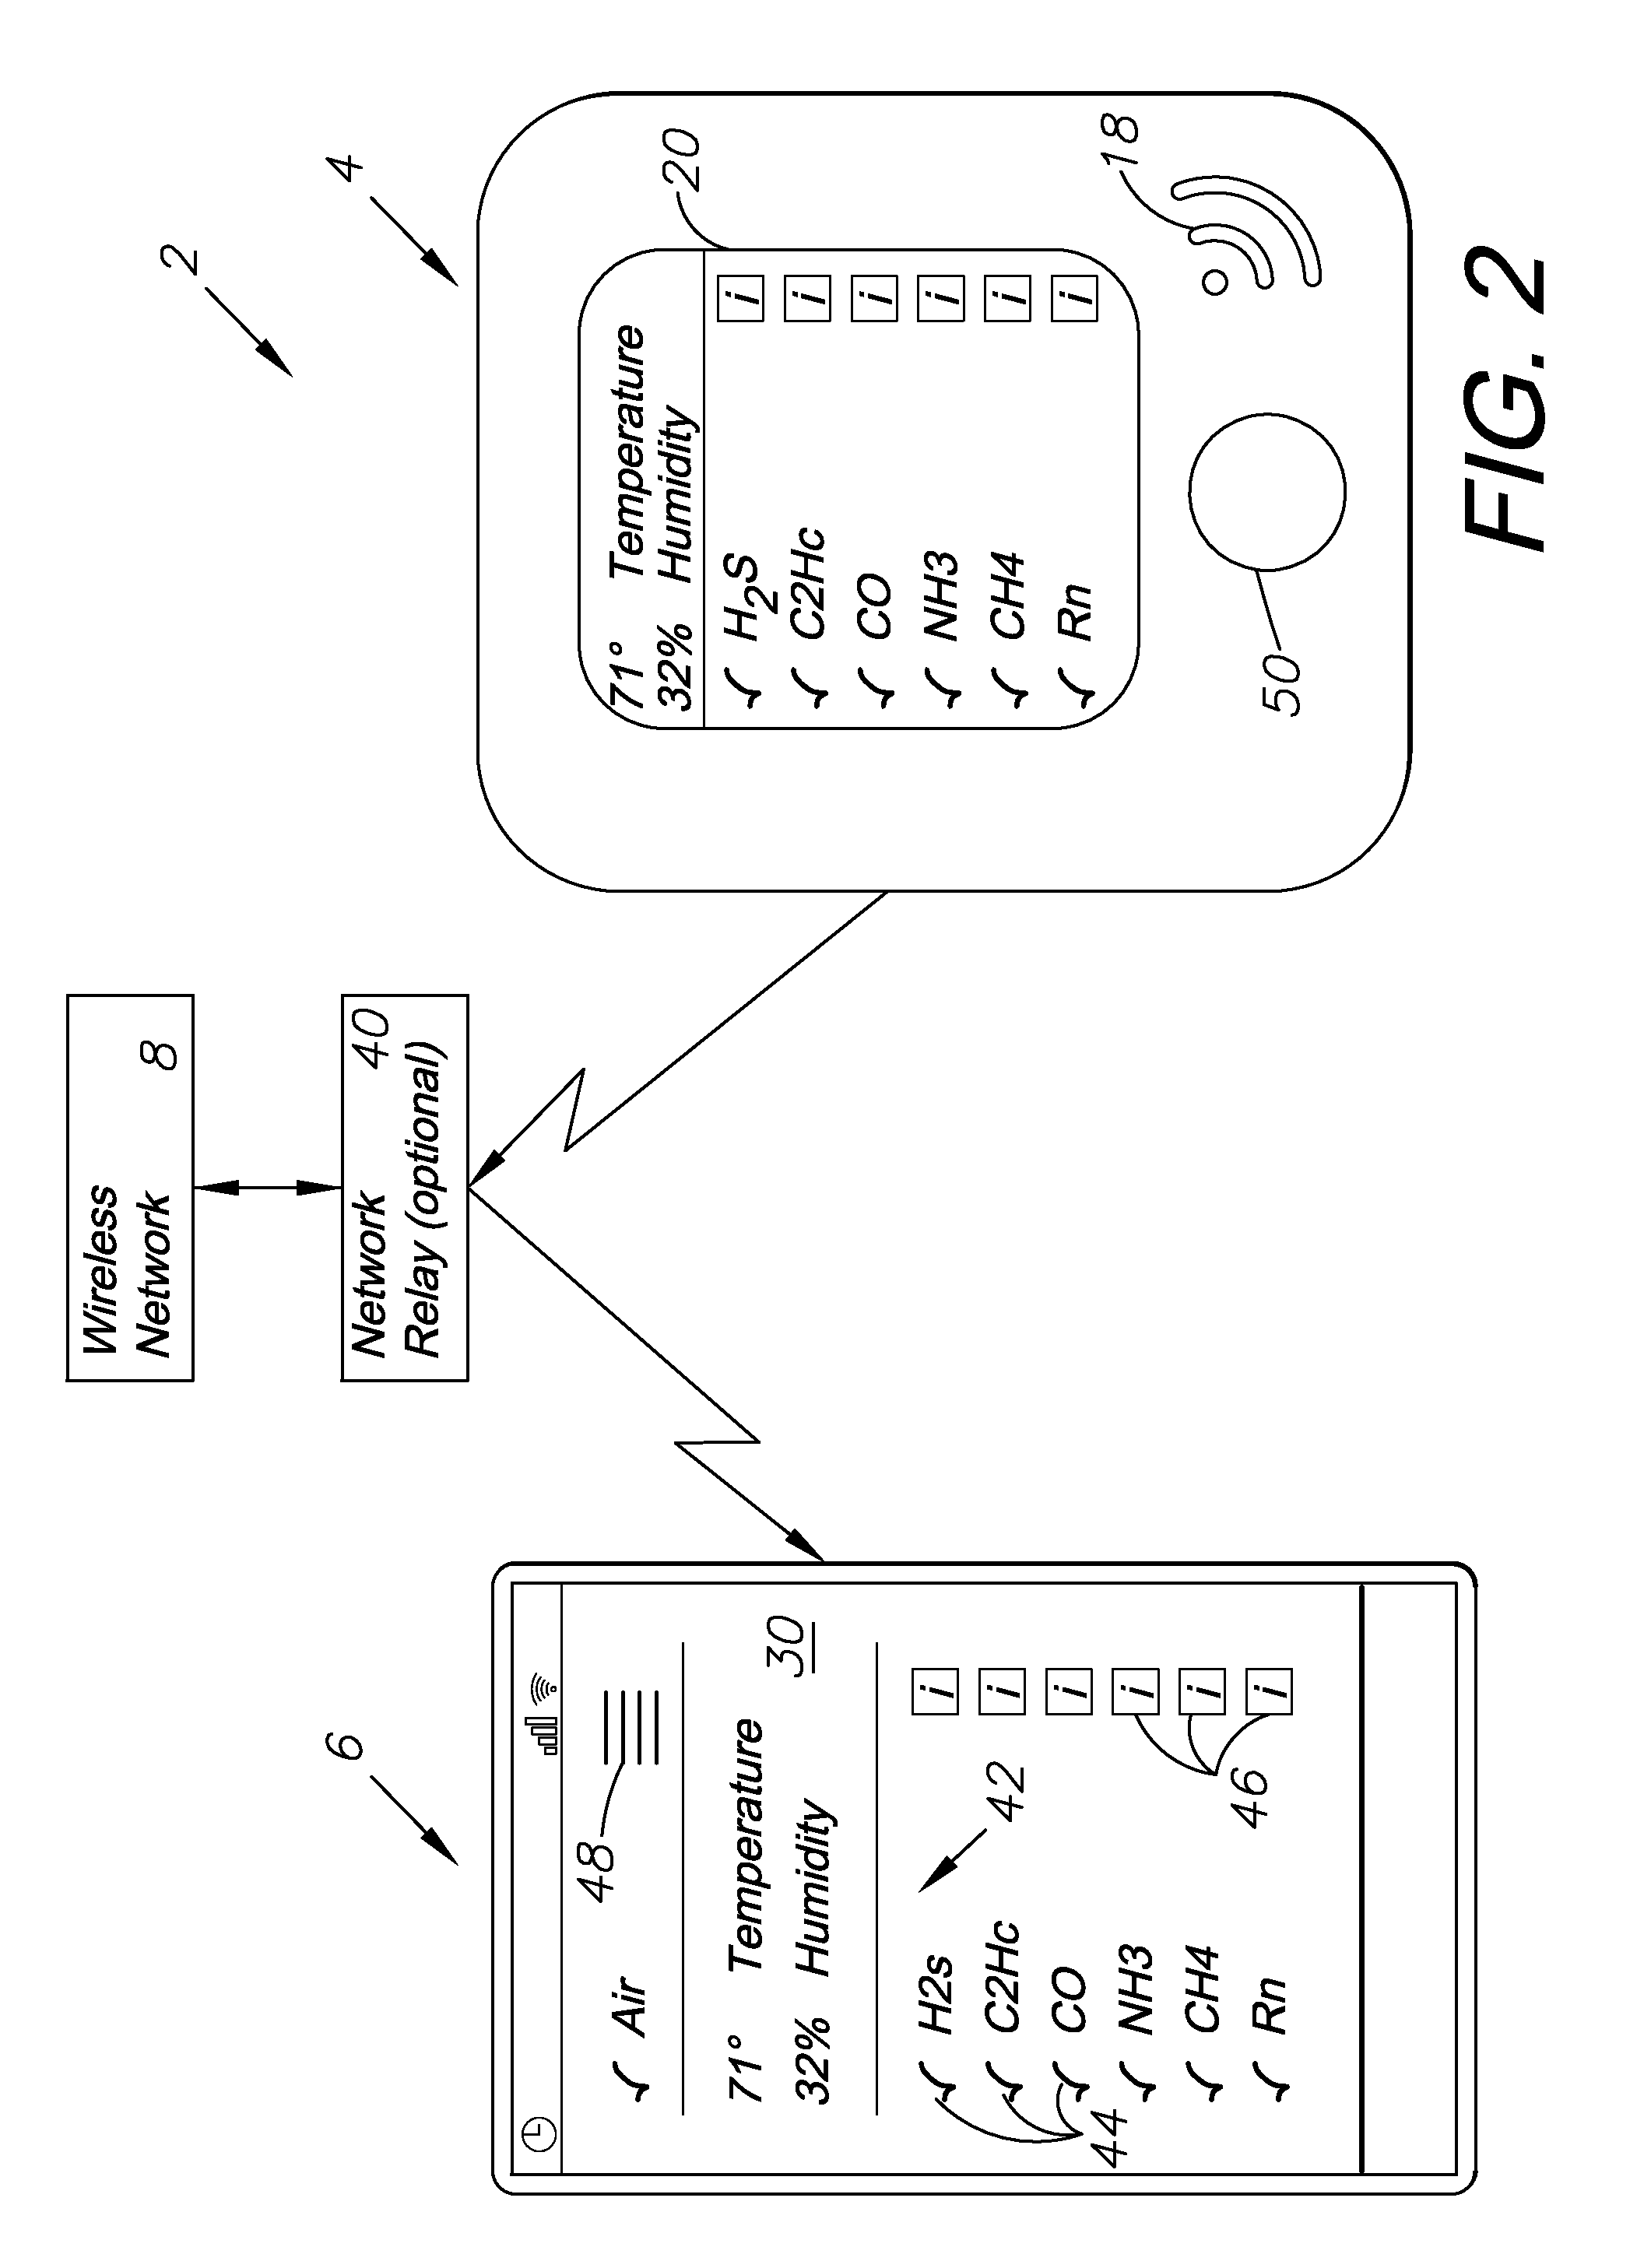 Gas-monitoring apparatus for detecting bowel movements and method of use